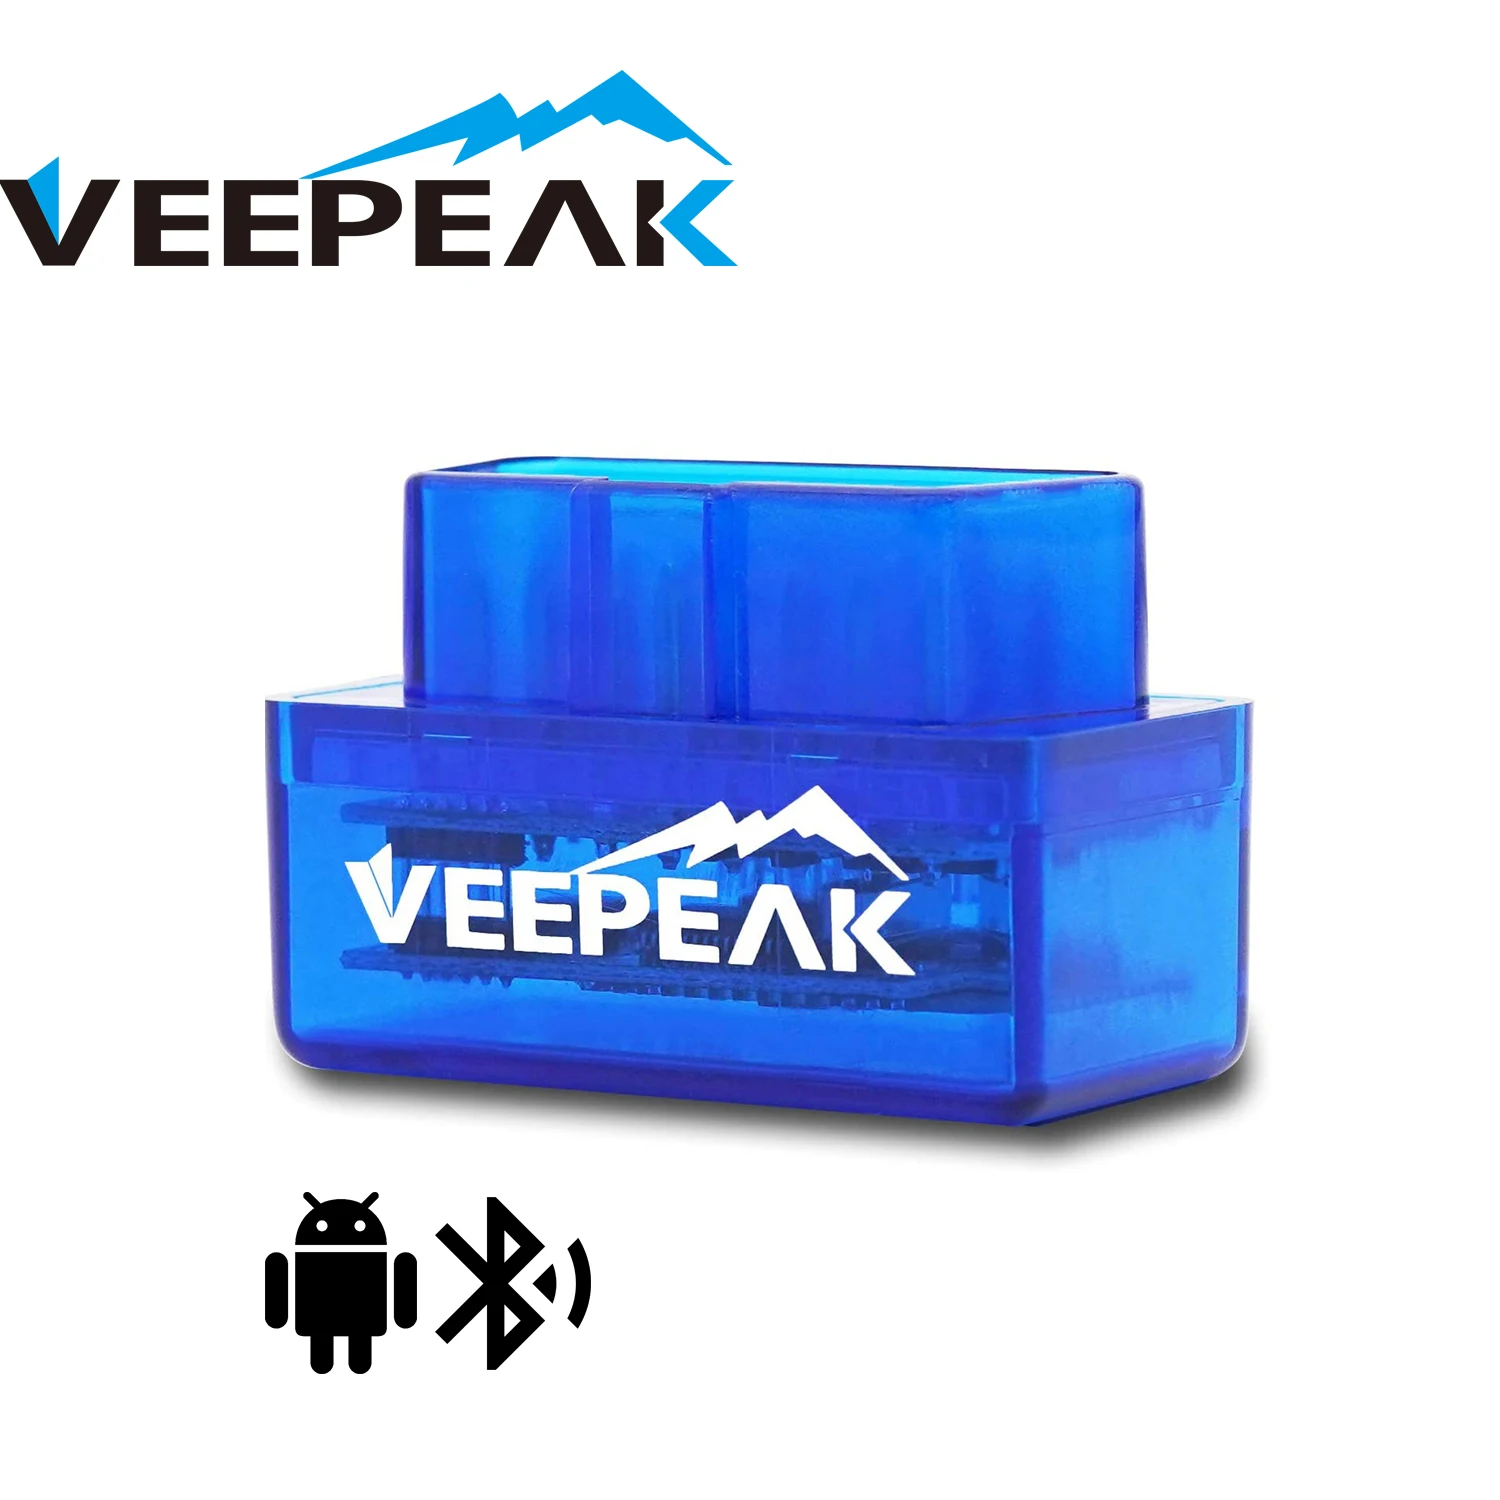 Veepeak Mini Bluetooth OBD2 Scanner for Android, Car OBD II Diagnostic Scan Tool Check Engine Light Code Reader, Supports Torque foxwell nt650 elite obd2 automotive scanner sas a f oil epb brt tps 26 reset professional auto car diagnostic tool obd2 scanner